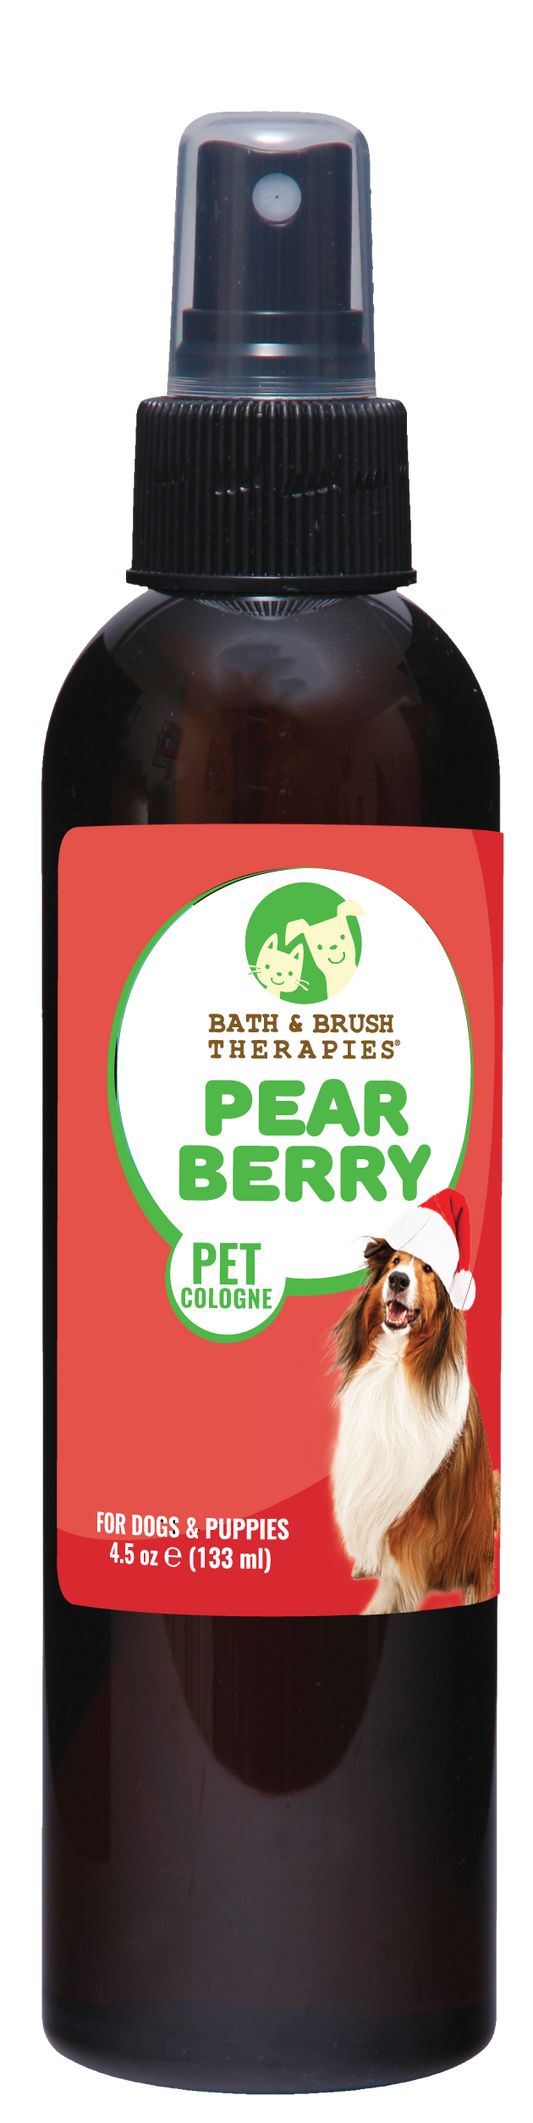 Pear Berry Pet Cologne | Bath & Brush Therapies®